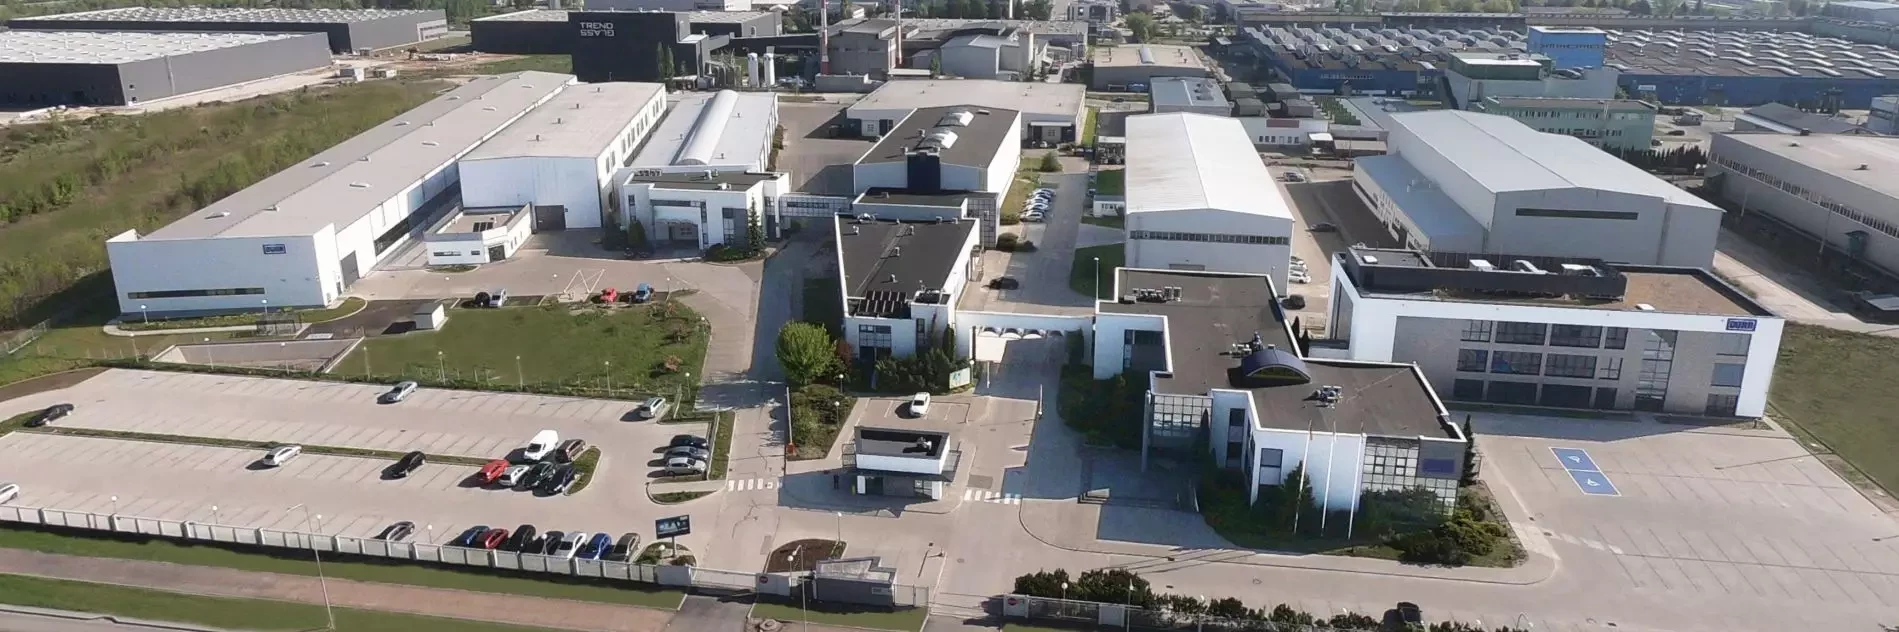 Dürr Poland location an overview of the building complex